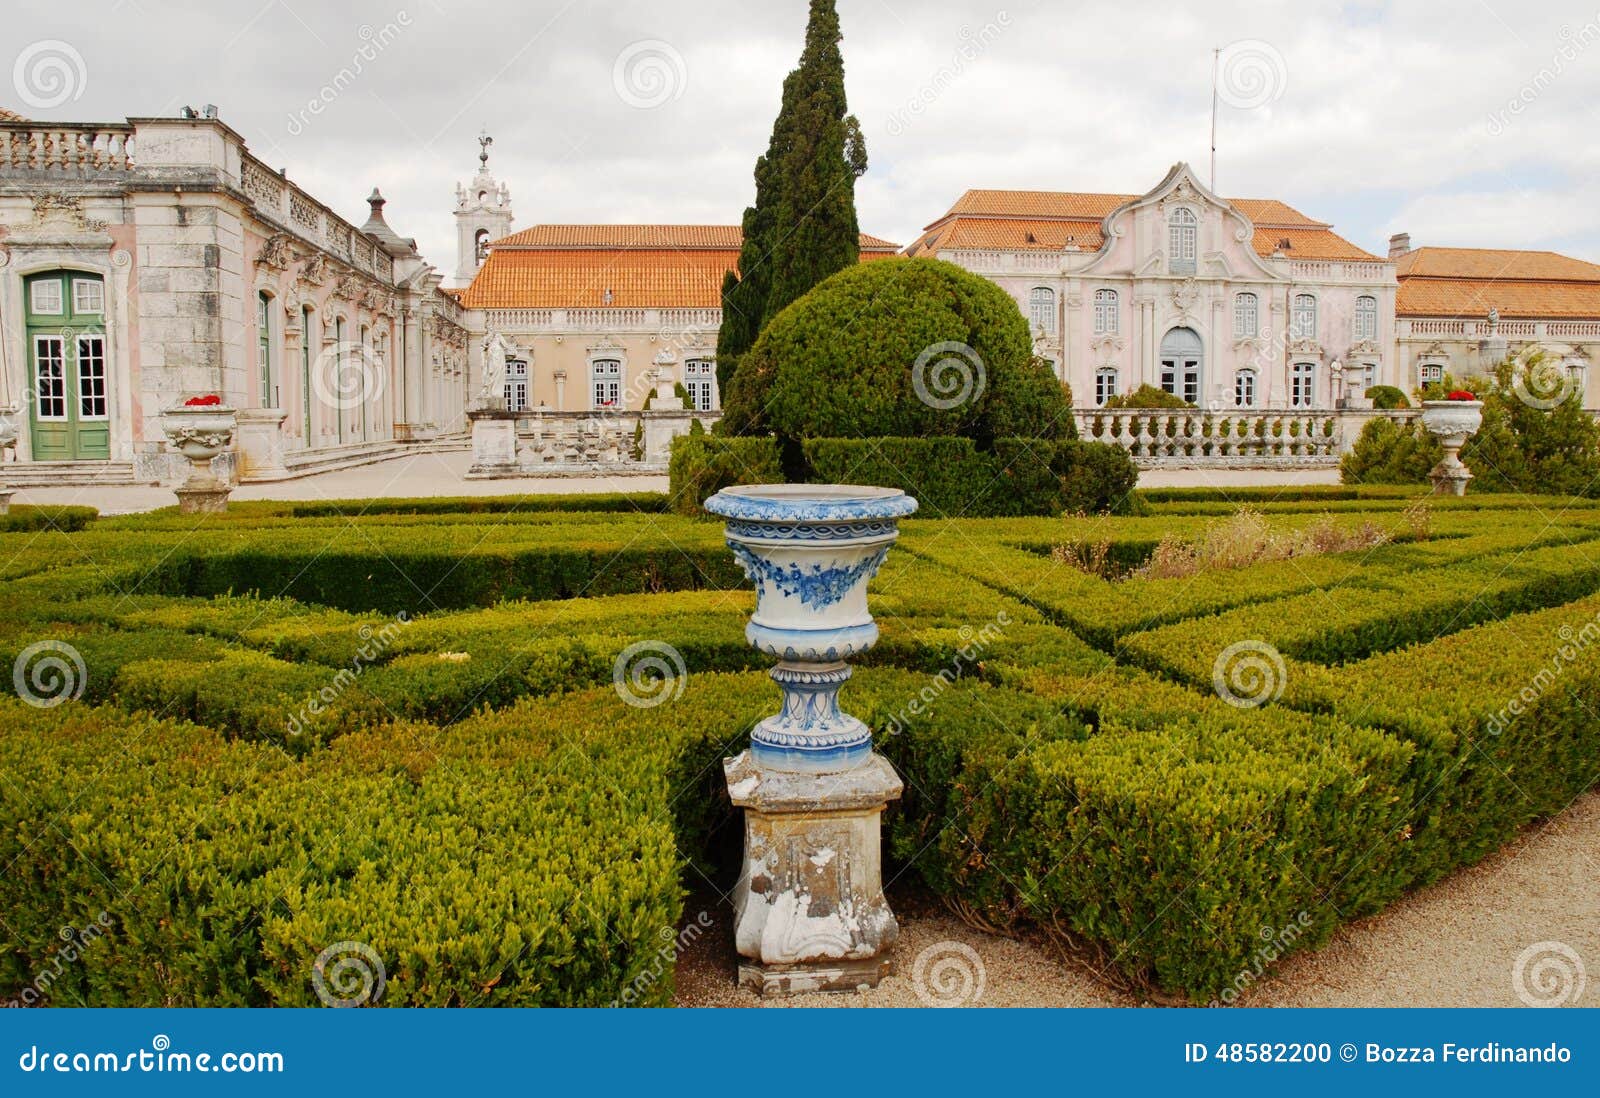 the national palace of queluz